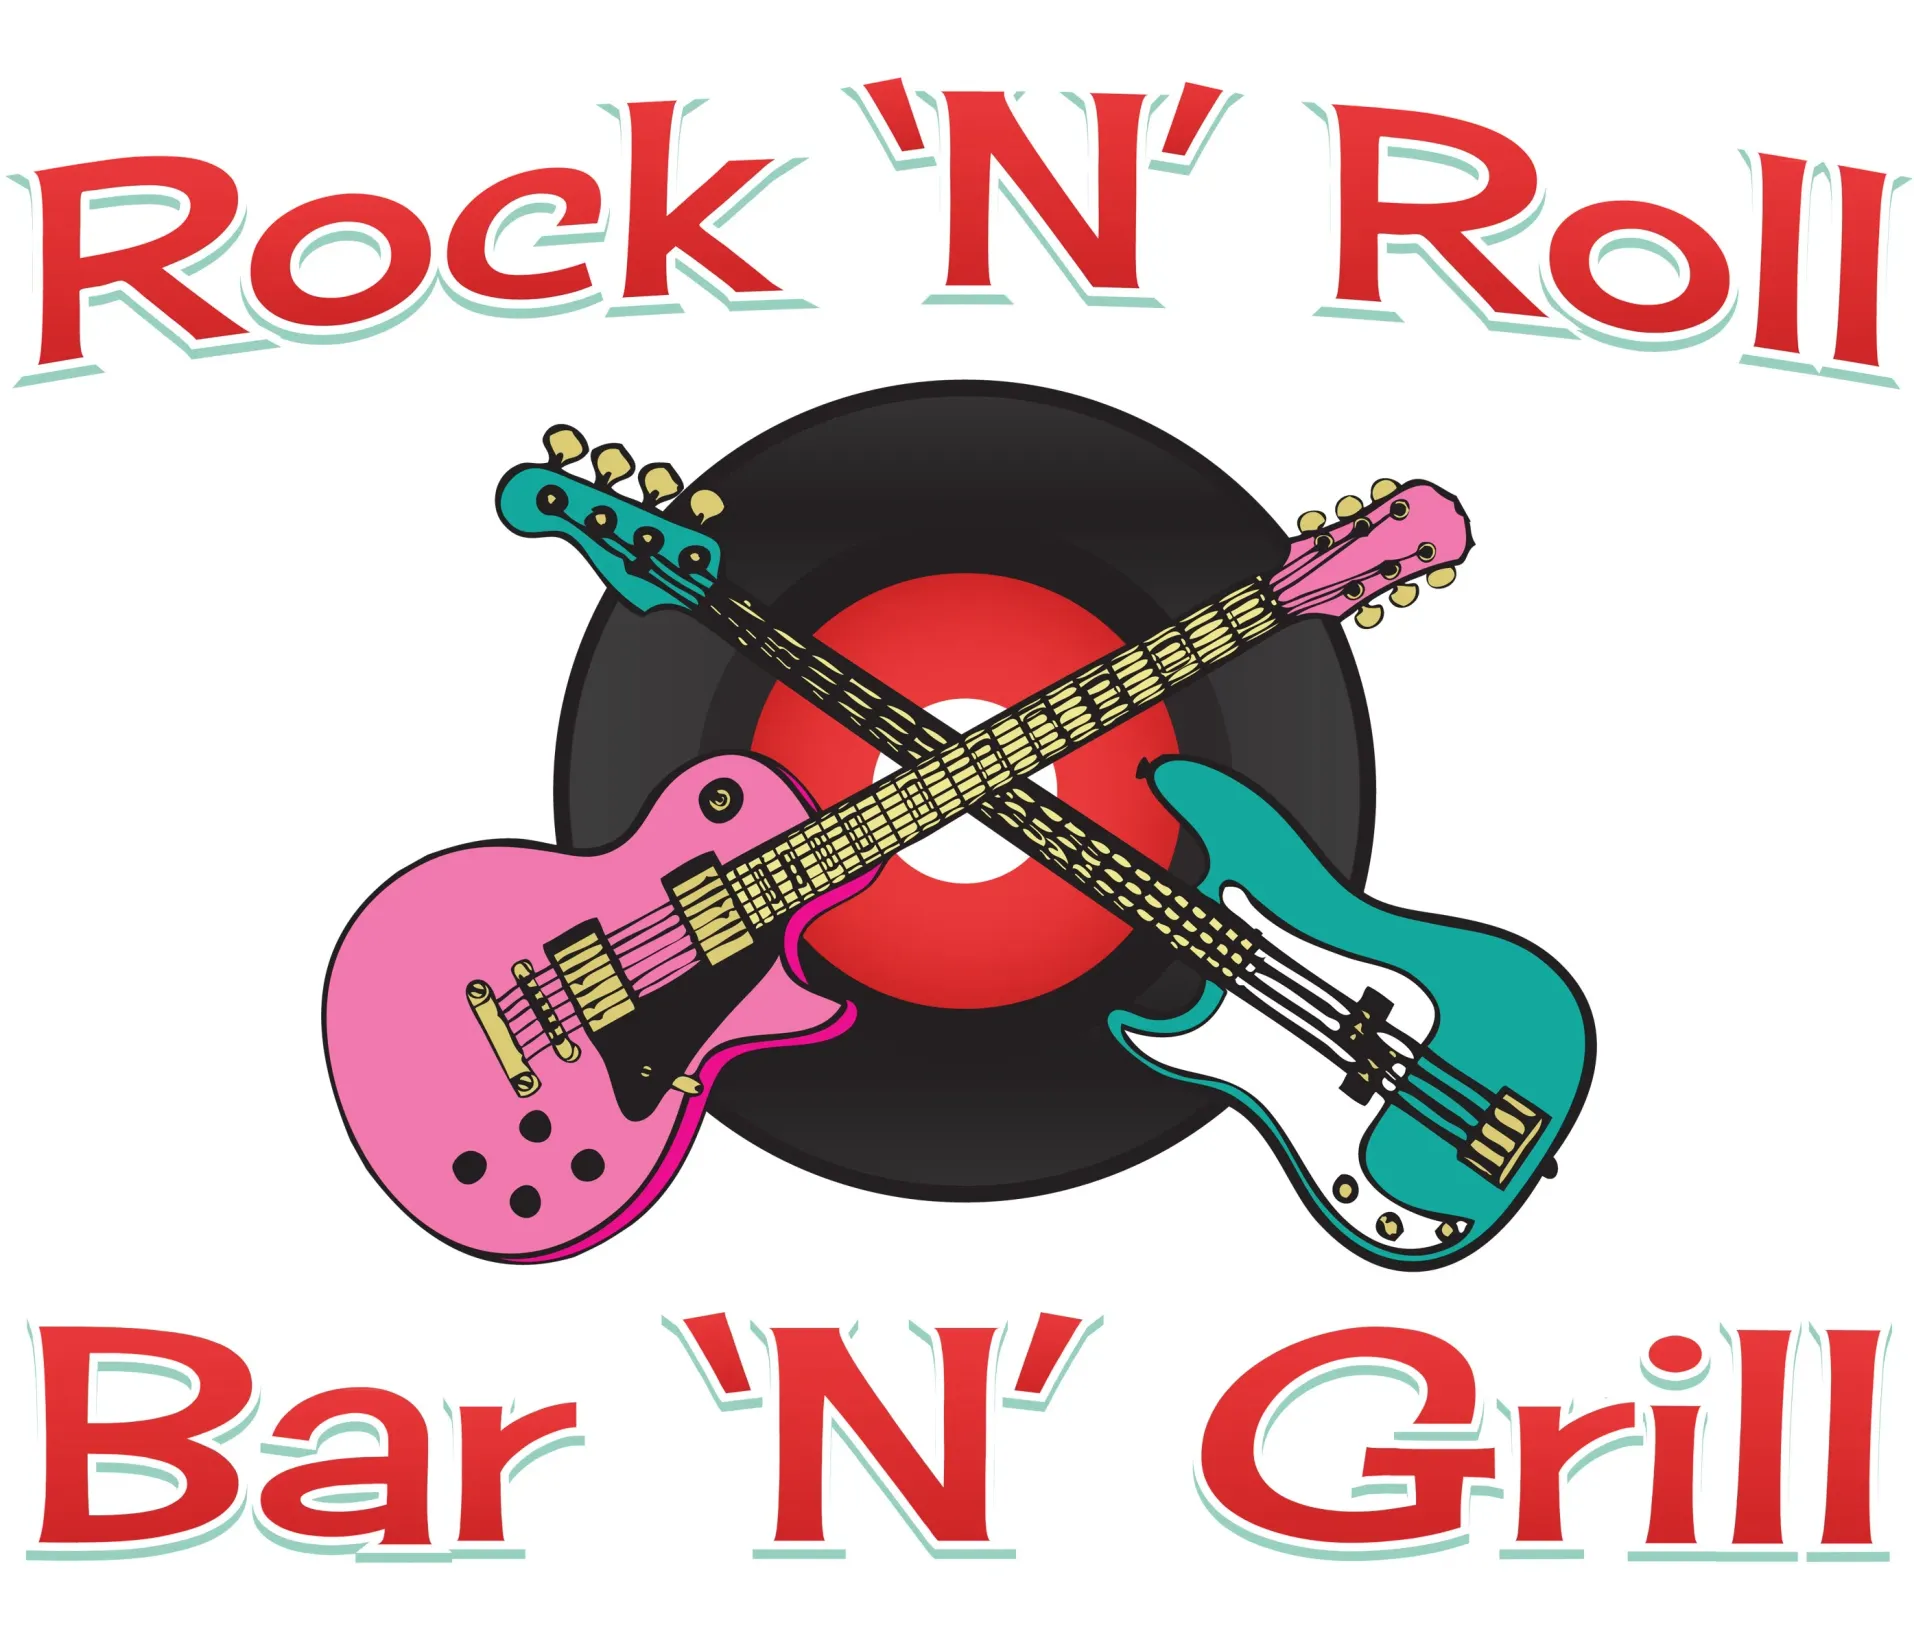 Rock n Roll Bar and Grill